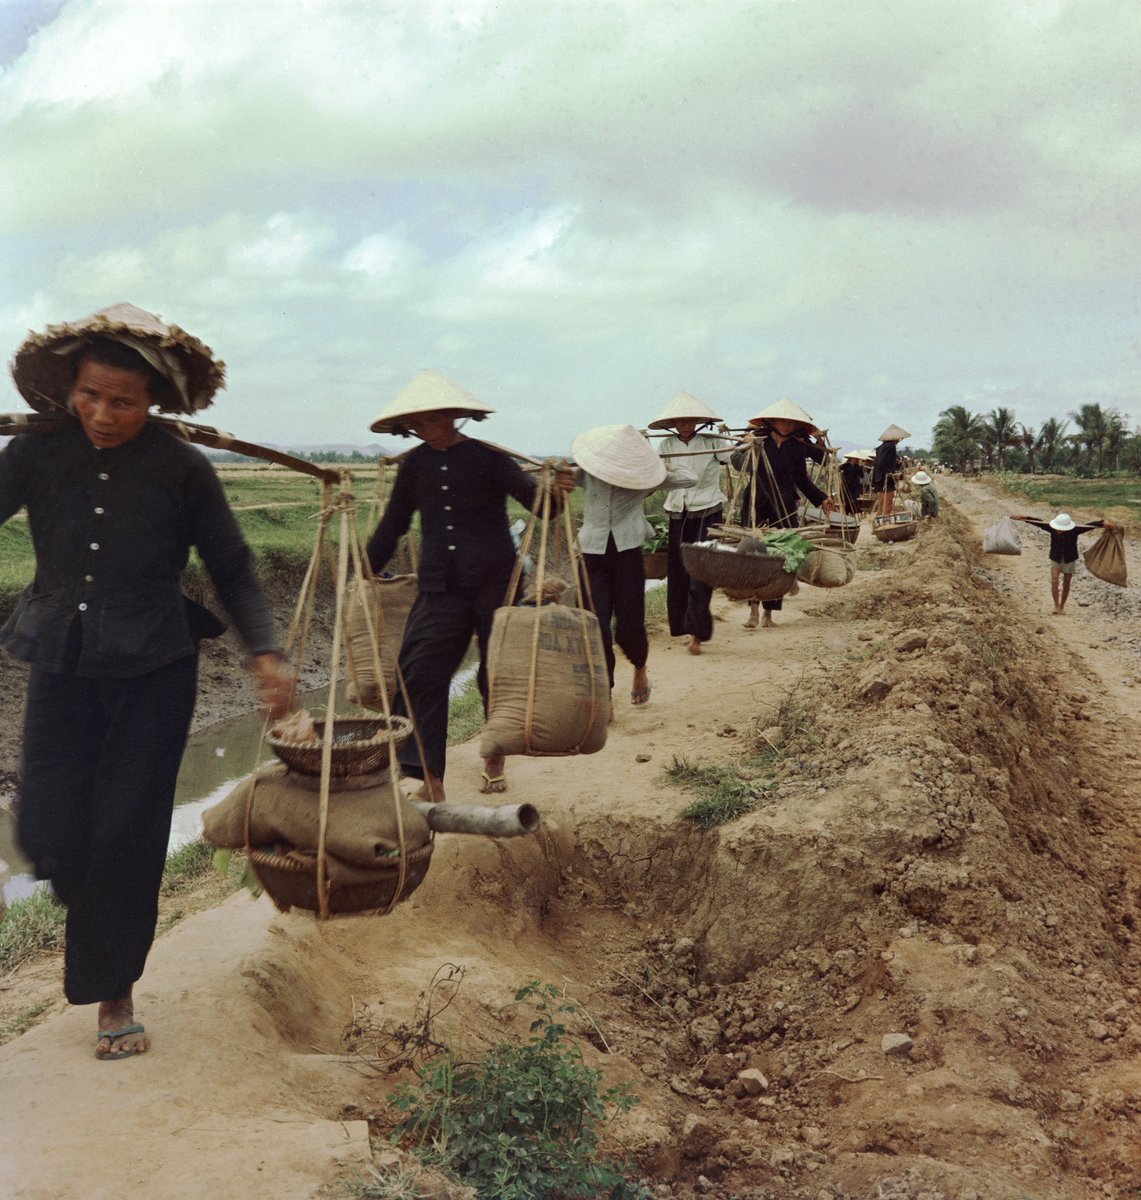 In 1967,  was mired in the Vietnam War. The corrupt South Vietnamese regime was doing little for its people: in 1966, 42% of farmers were landless peasants.To help the war effort,  policymakers considered land reform—redistributing land from landlords to peasants. 2/